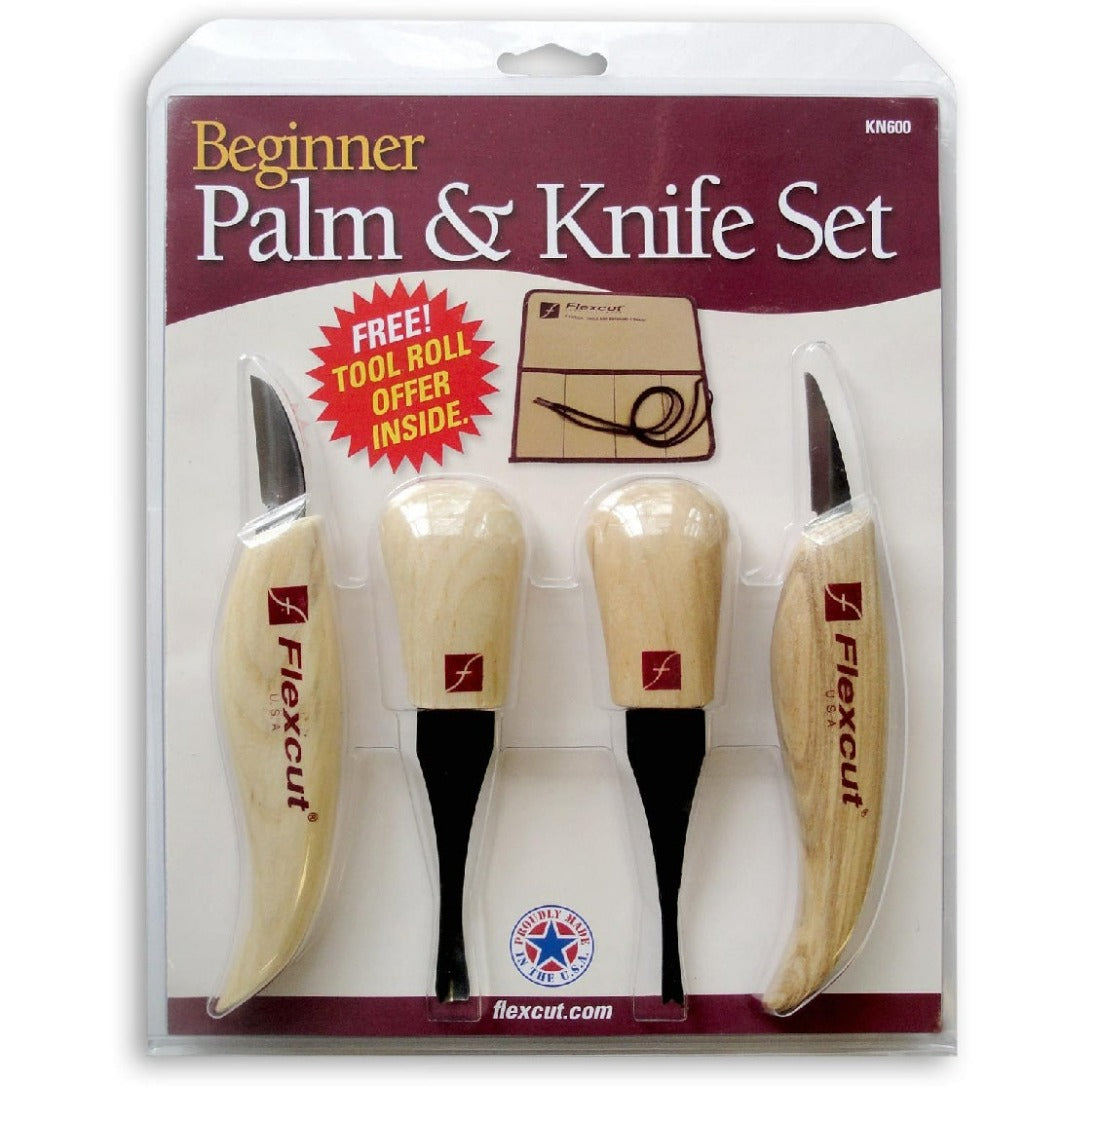 Flexcut Beginner Palm and Knife Set KN600 of two gouges and two knives in its clear plastic packaging